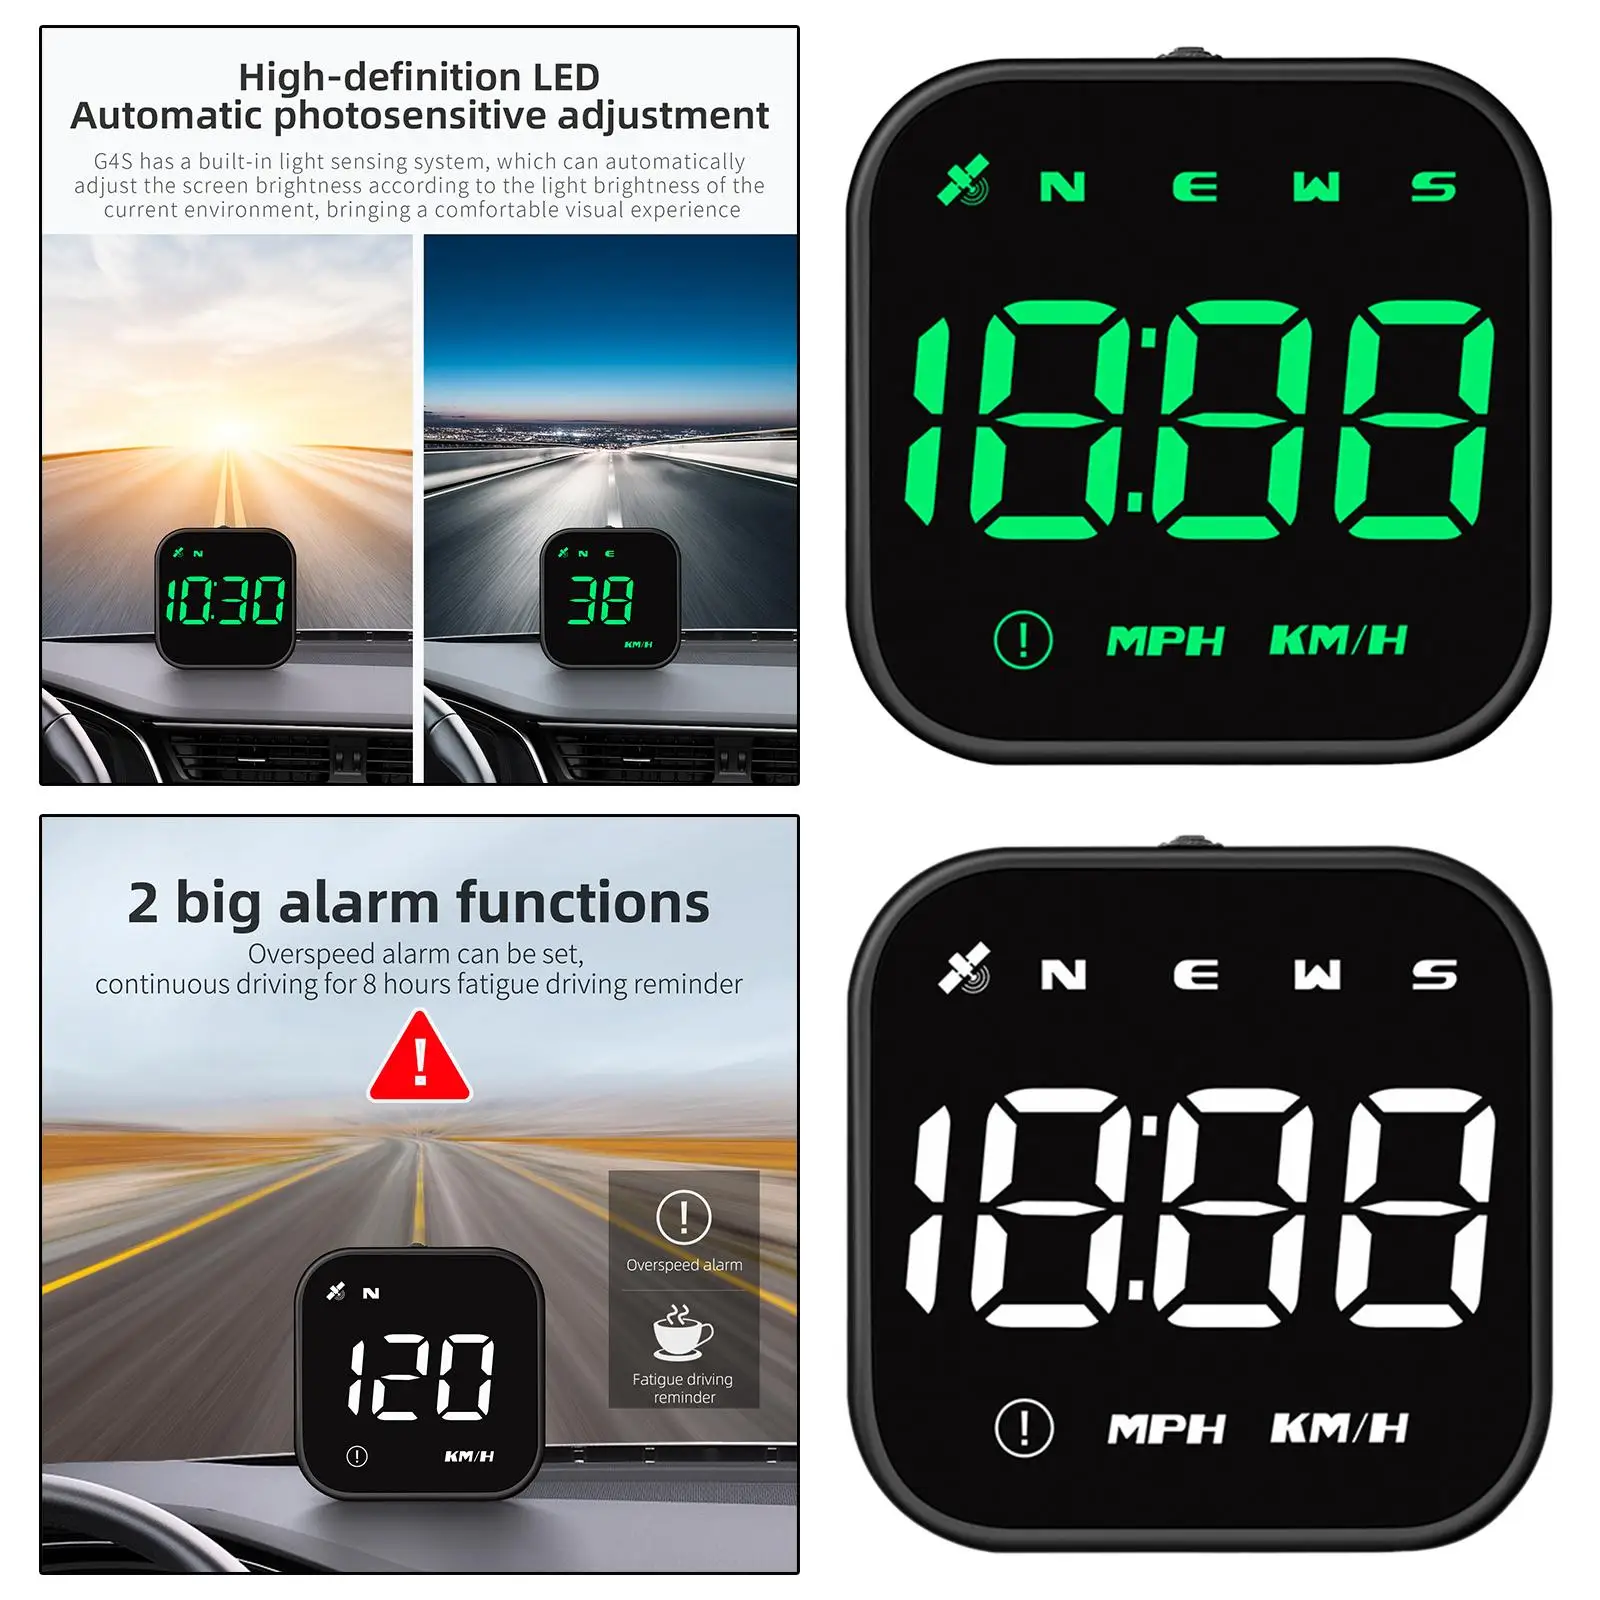 Car HUD Head up Display Tired Driving Alarm Multipurpose Car Accessories Universal over Speed Warning for Trucks Suvs Buses